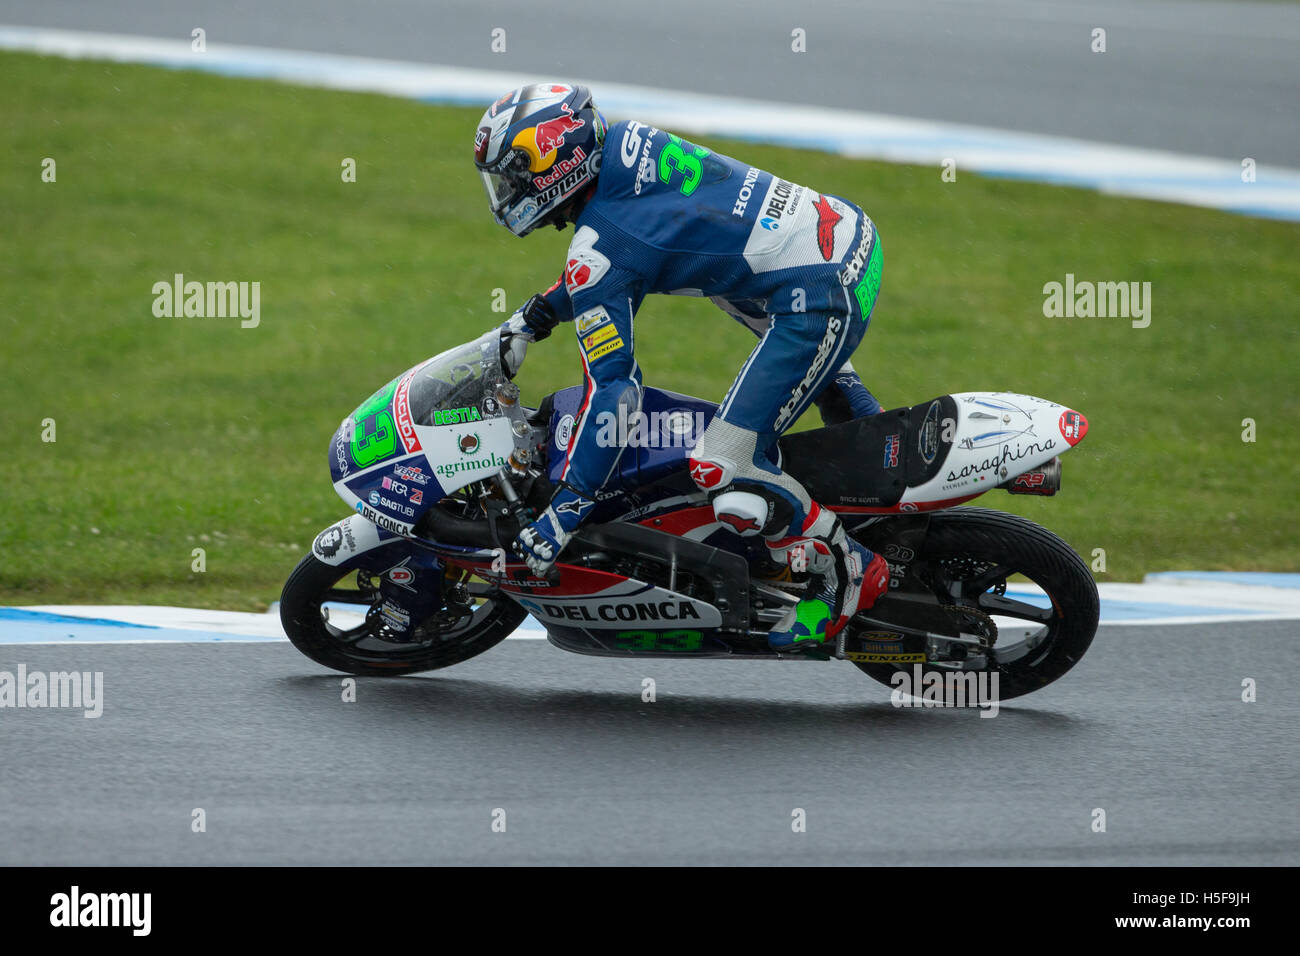 Enea Bastianini crashes during a wet Friday free practice at Phillip Island in the Moto3 category. Stock Photo